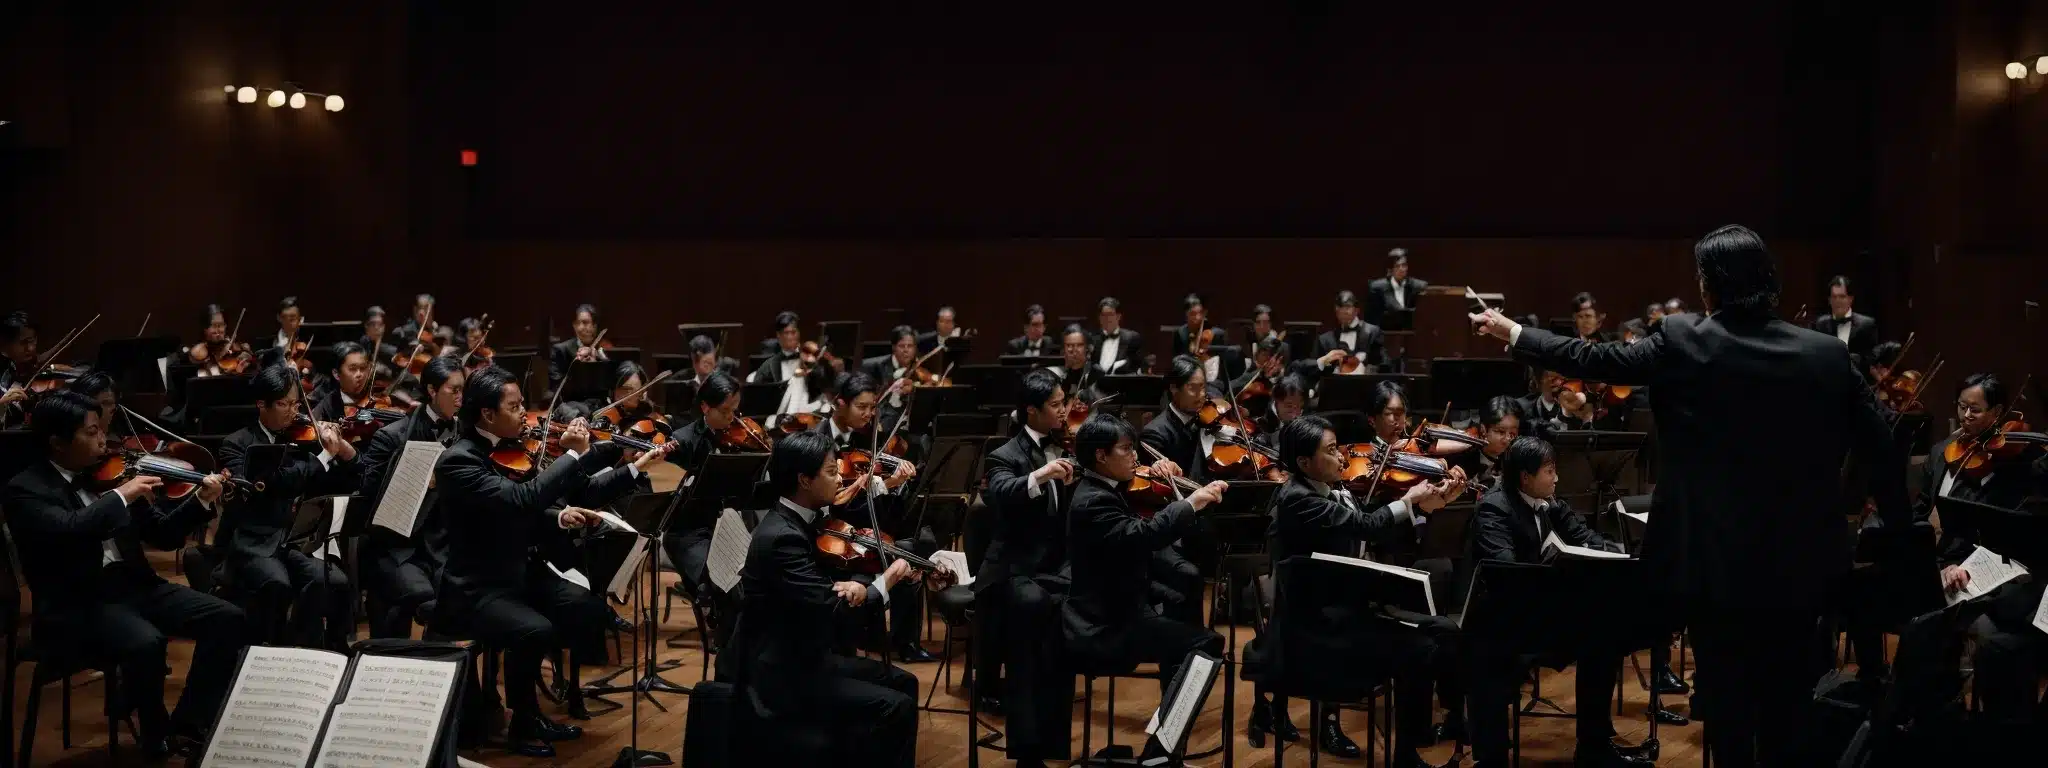 A Conductor Directs An Orchestra, Ensuring Each Section'S Performance Aligns To Create A Harmonious Symphony.